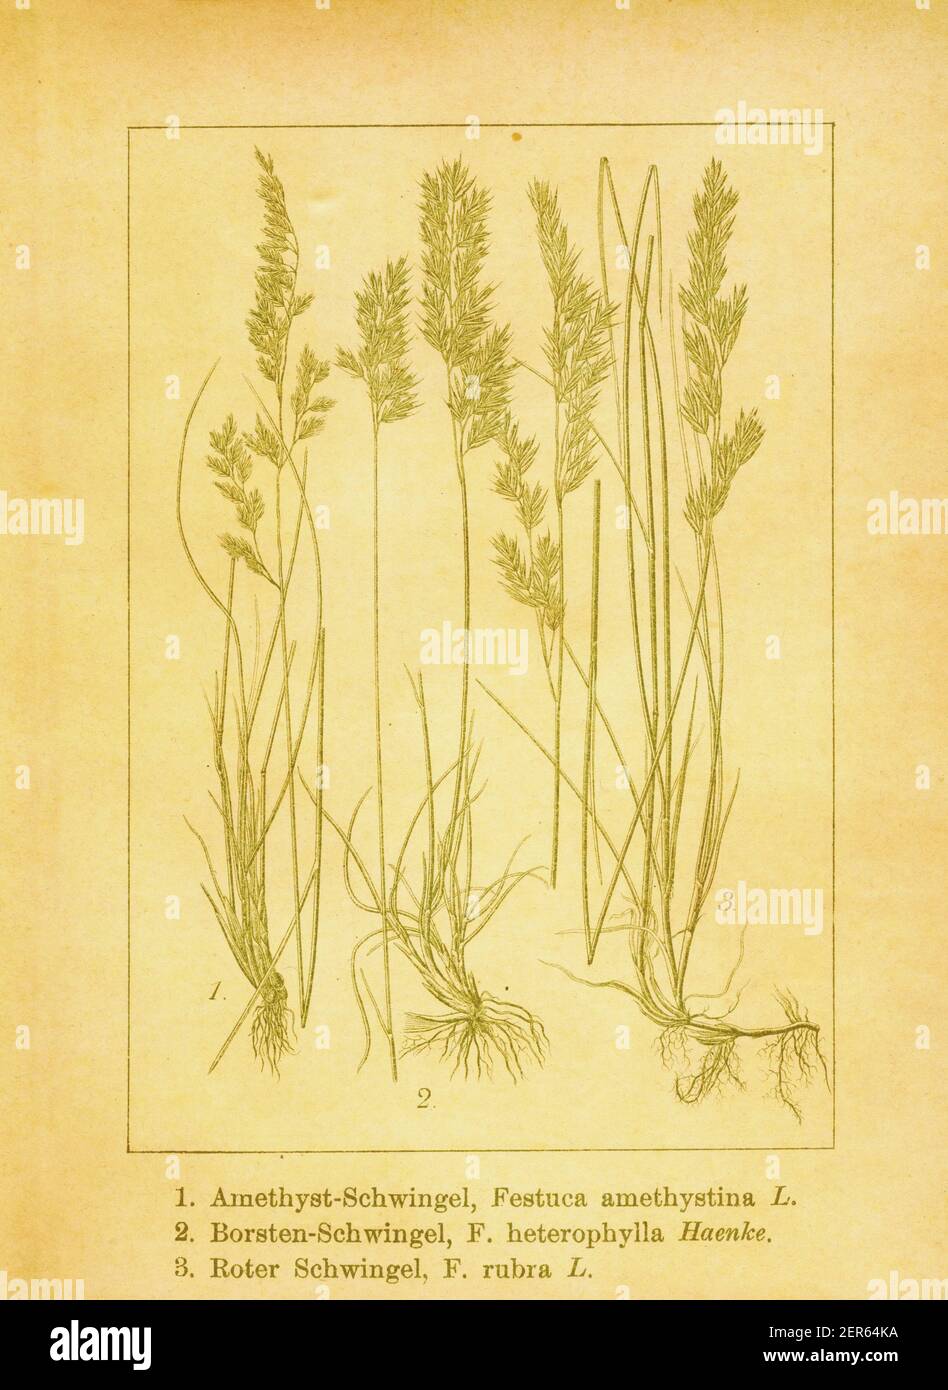 Antique engraving of tufted fescue, various-leaved fescue and red fescue. Illustration by Jacob Sturm (1771-1848) from the book Deutschlands Flora in Stock Photo